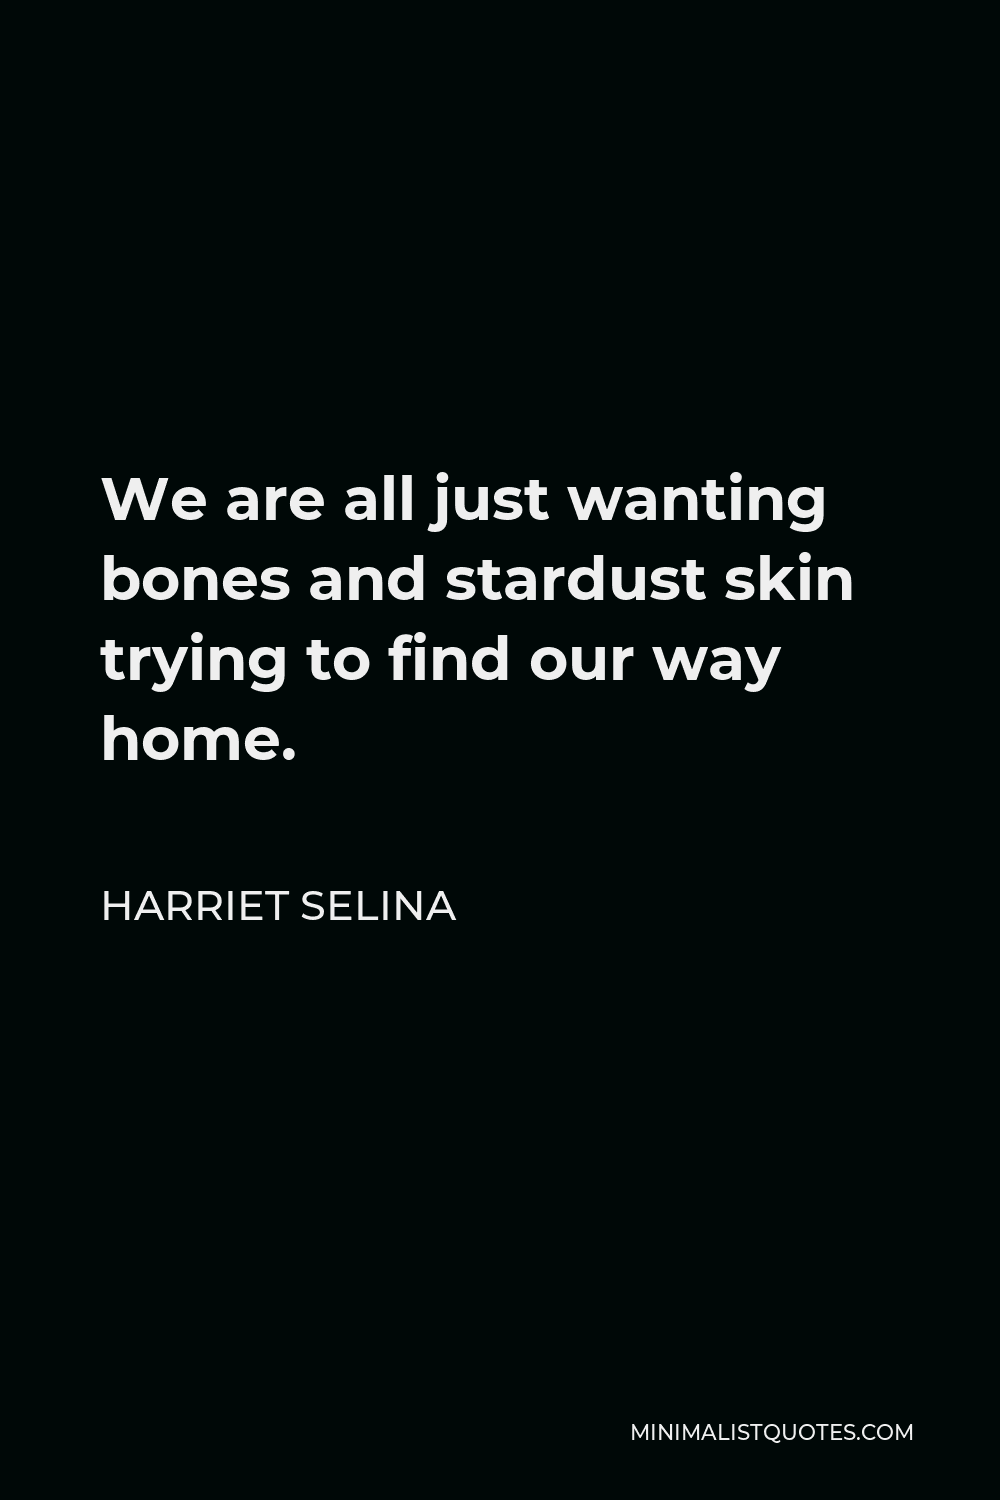 Harriet Selina Quote - We are all just wanting bones and stardust skin trying to find our way home.